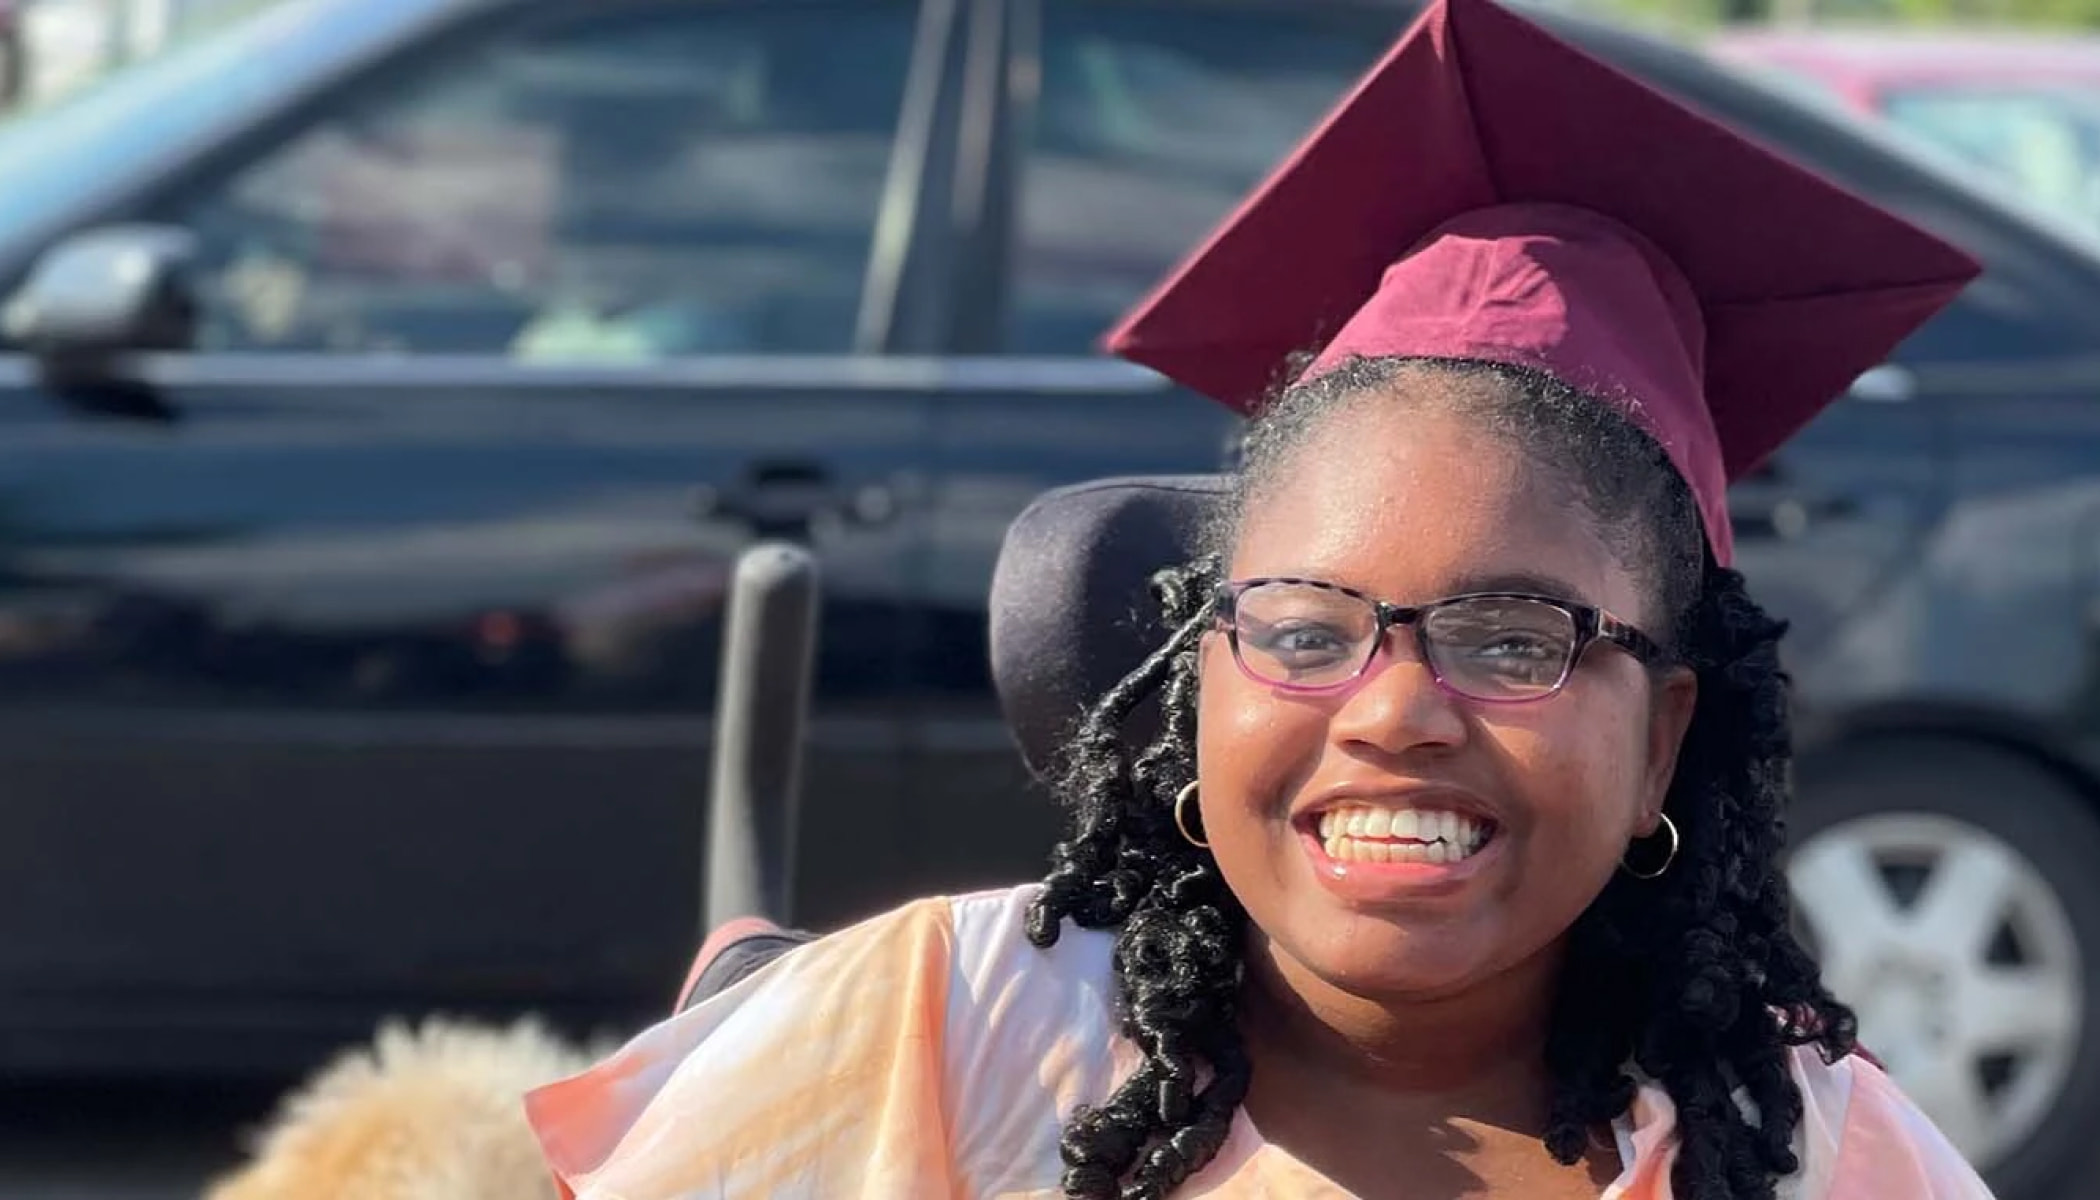 Khari McCrary, a teenage girl, wearing a graduation cap and sitting in a wheelchair, smiles in the school parking lot.